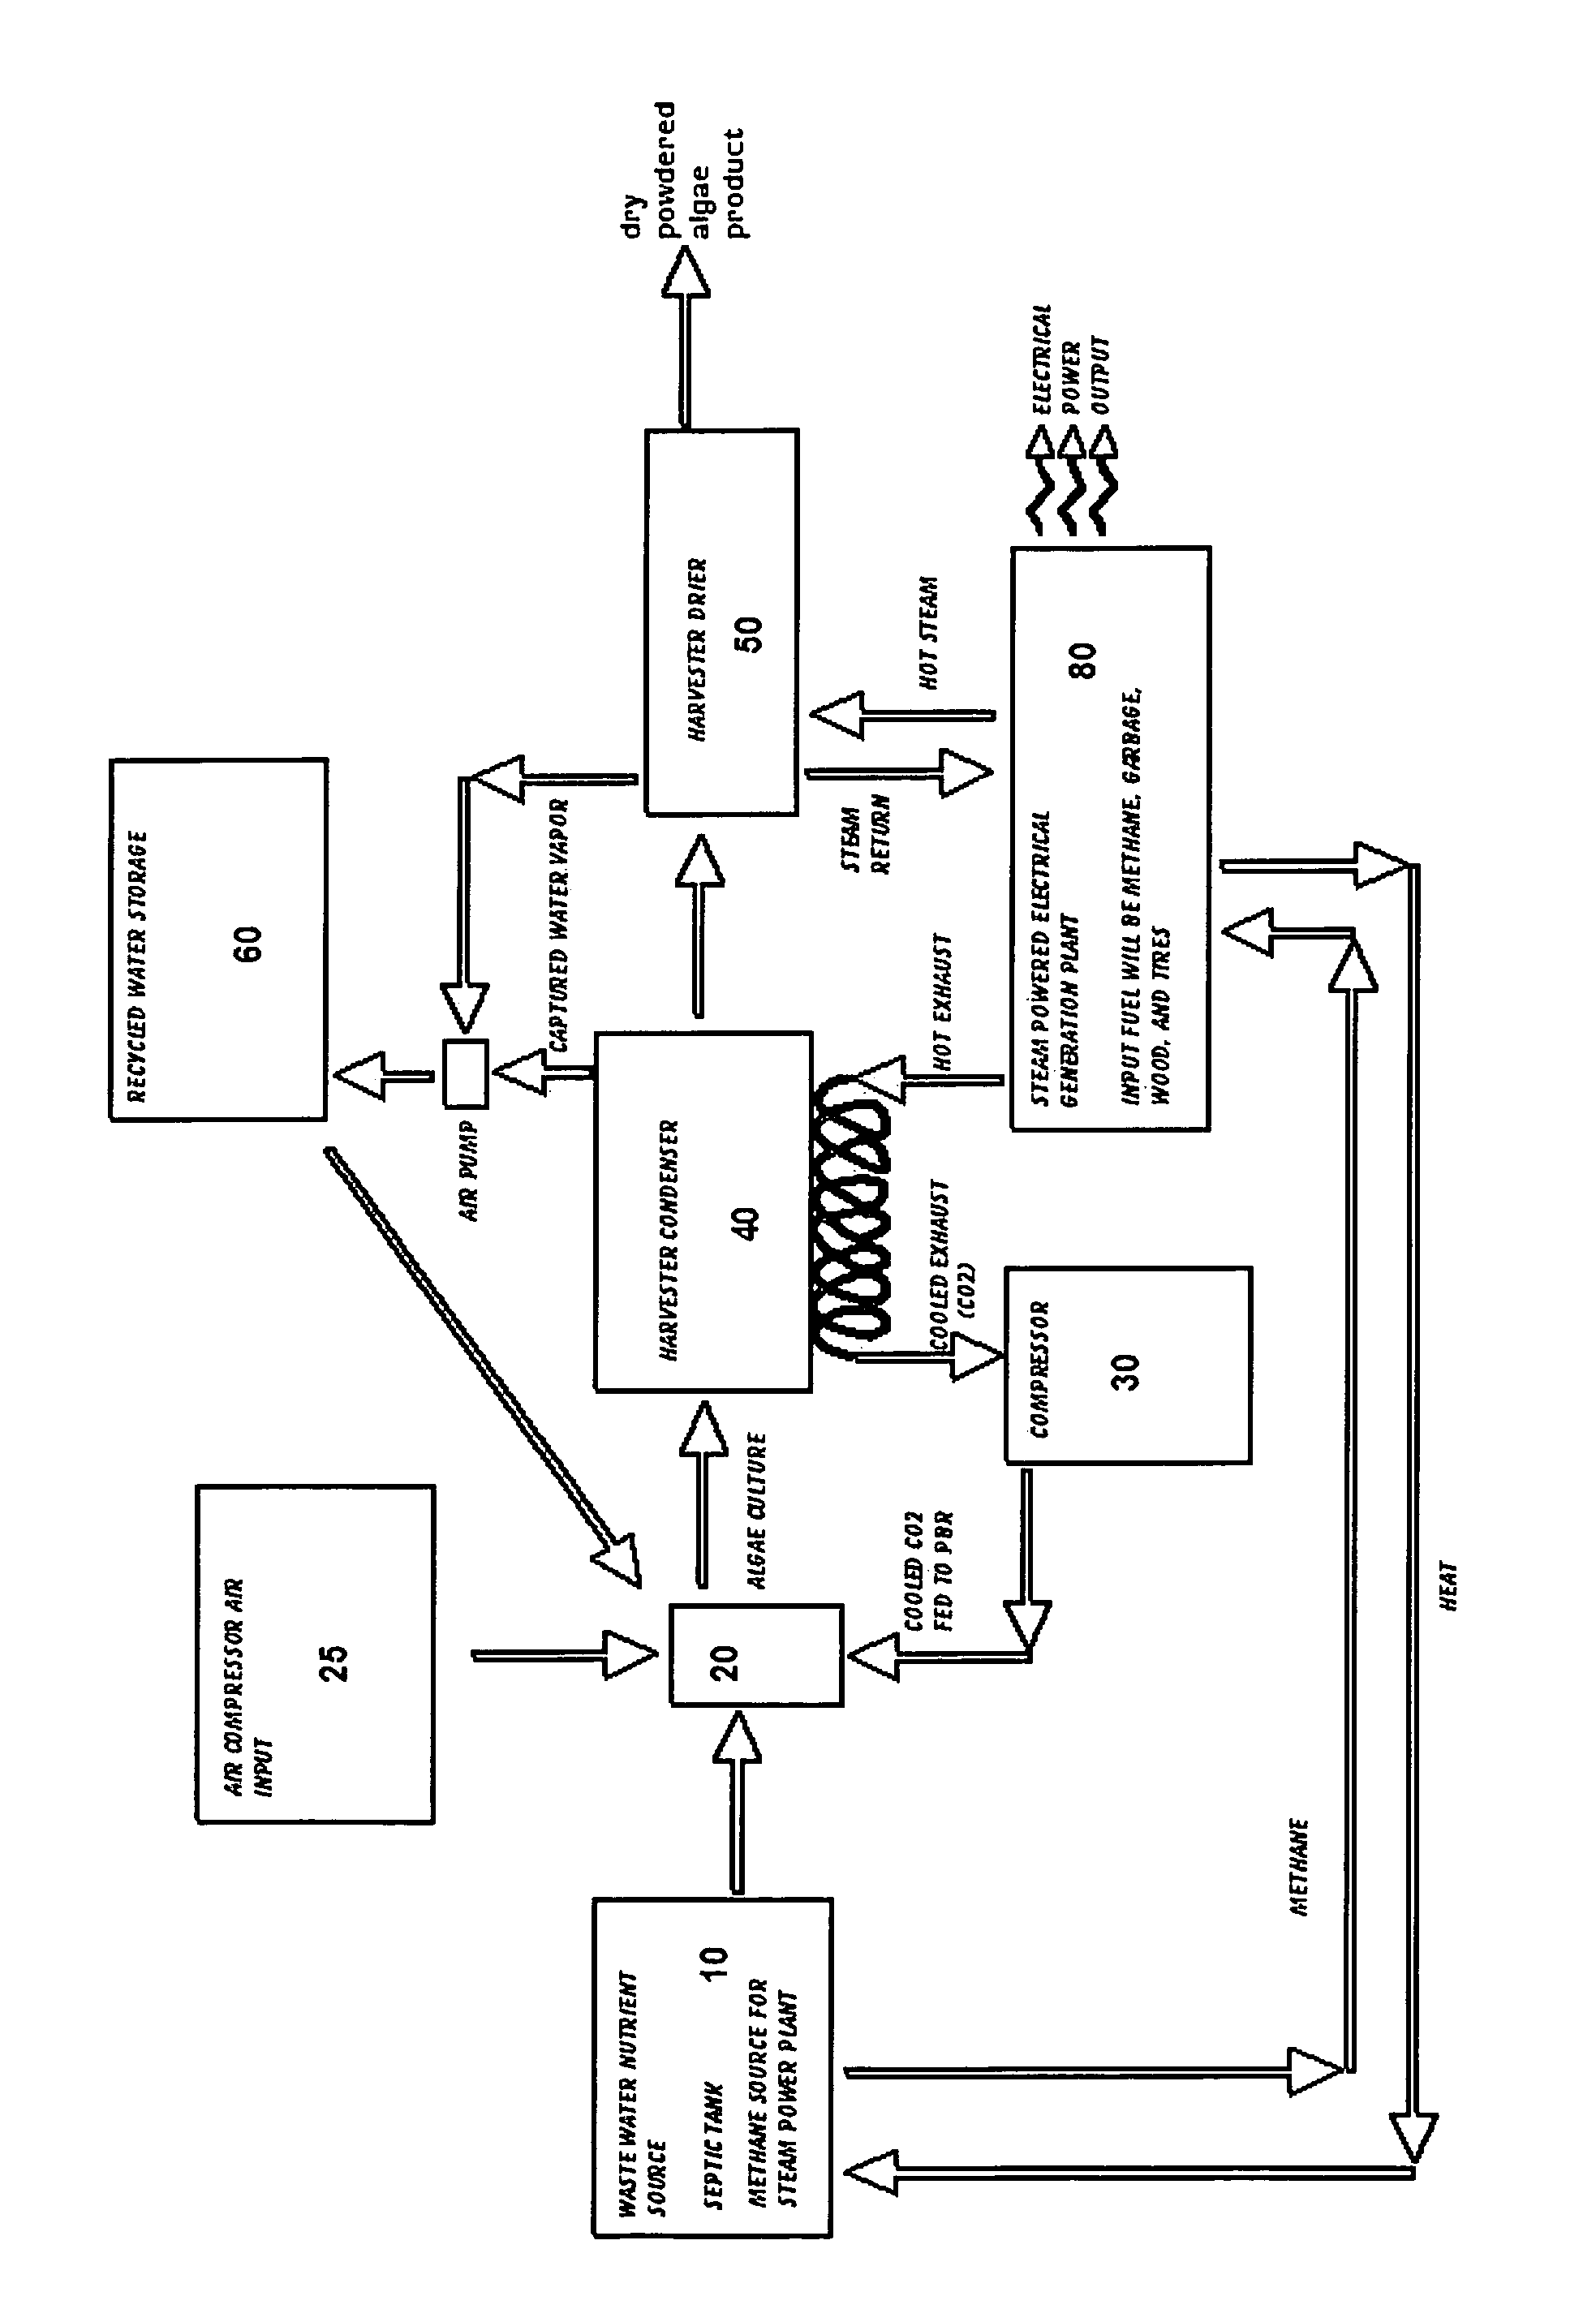 Process for a sustainable growth of algae in a bioreactor and for the extraction of a biofuel product